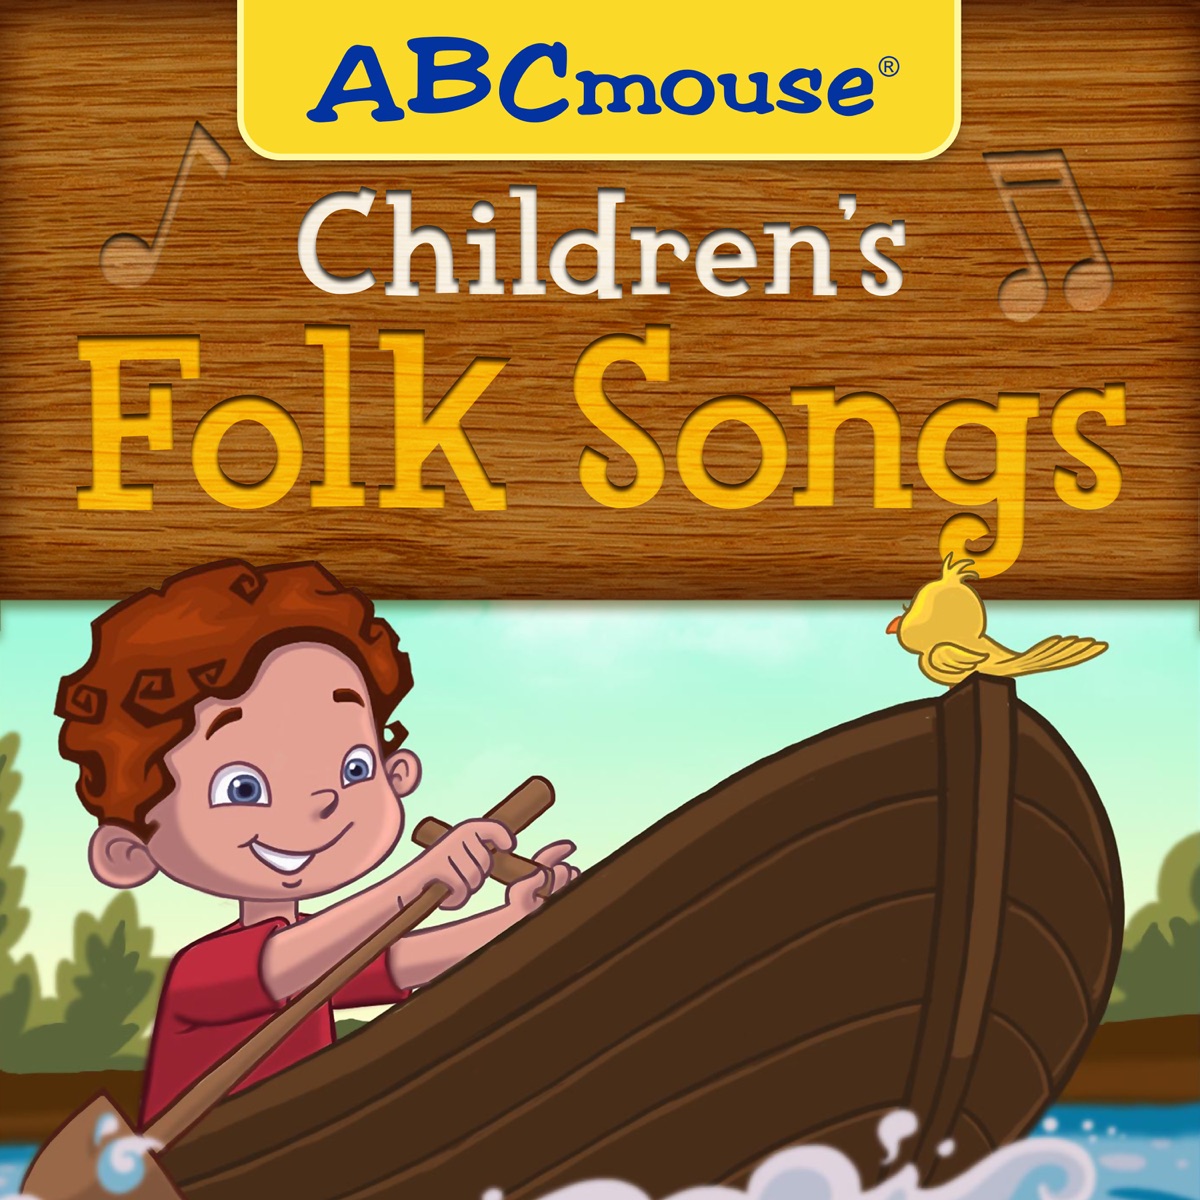 The Sound Of Letter Songs A To Z By Abcmouse On Apple Music